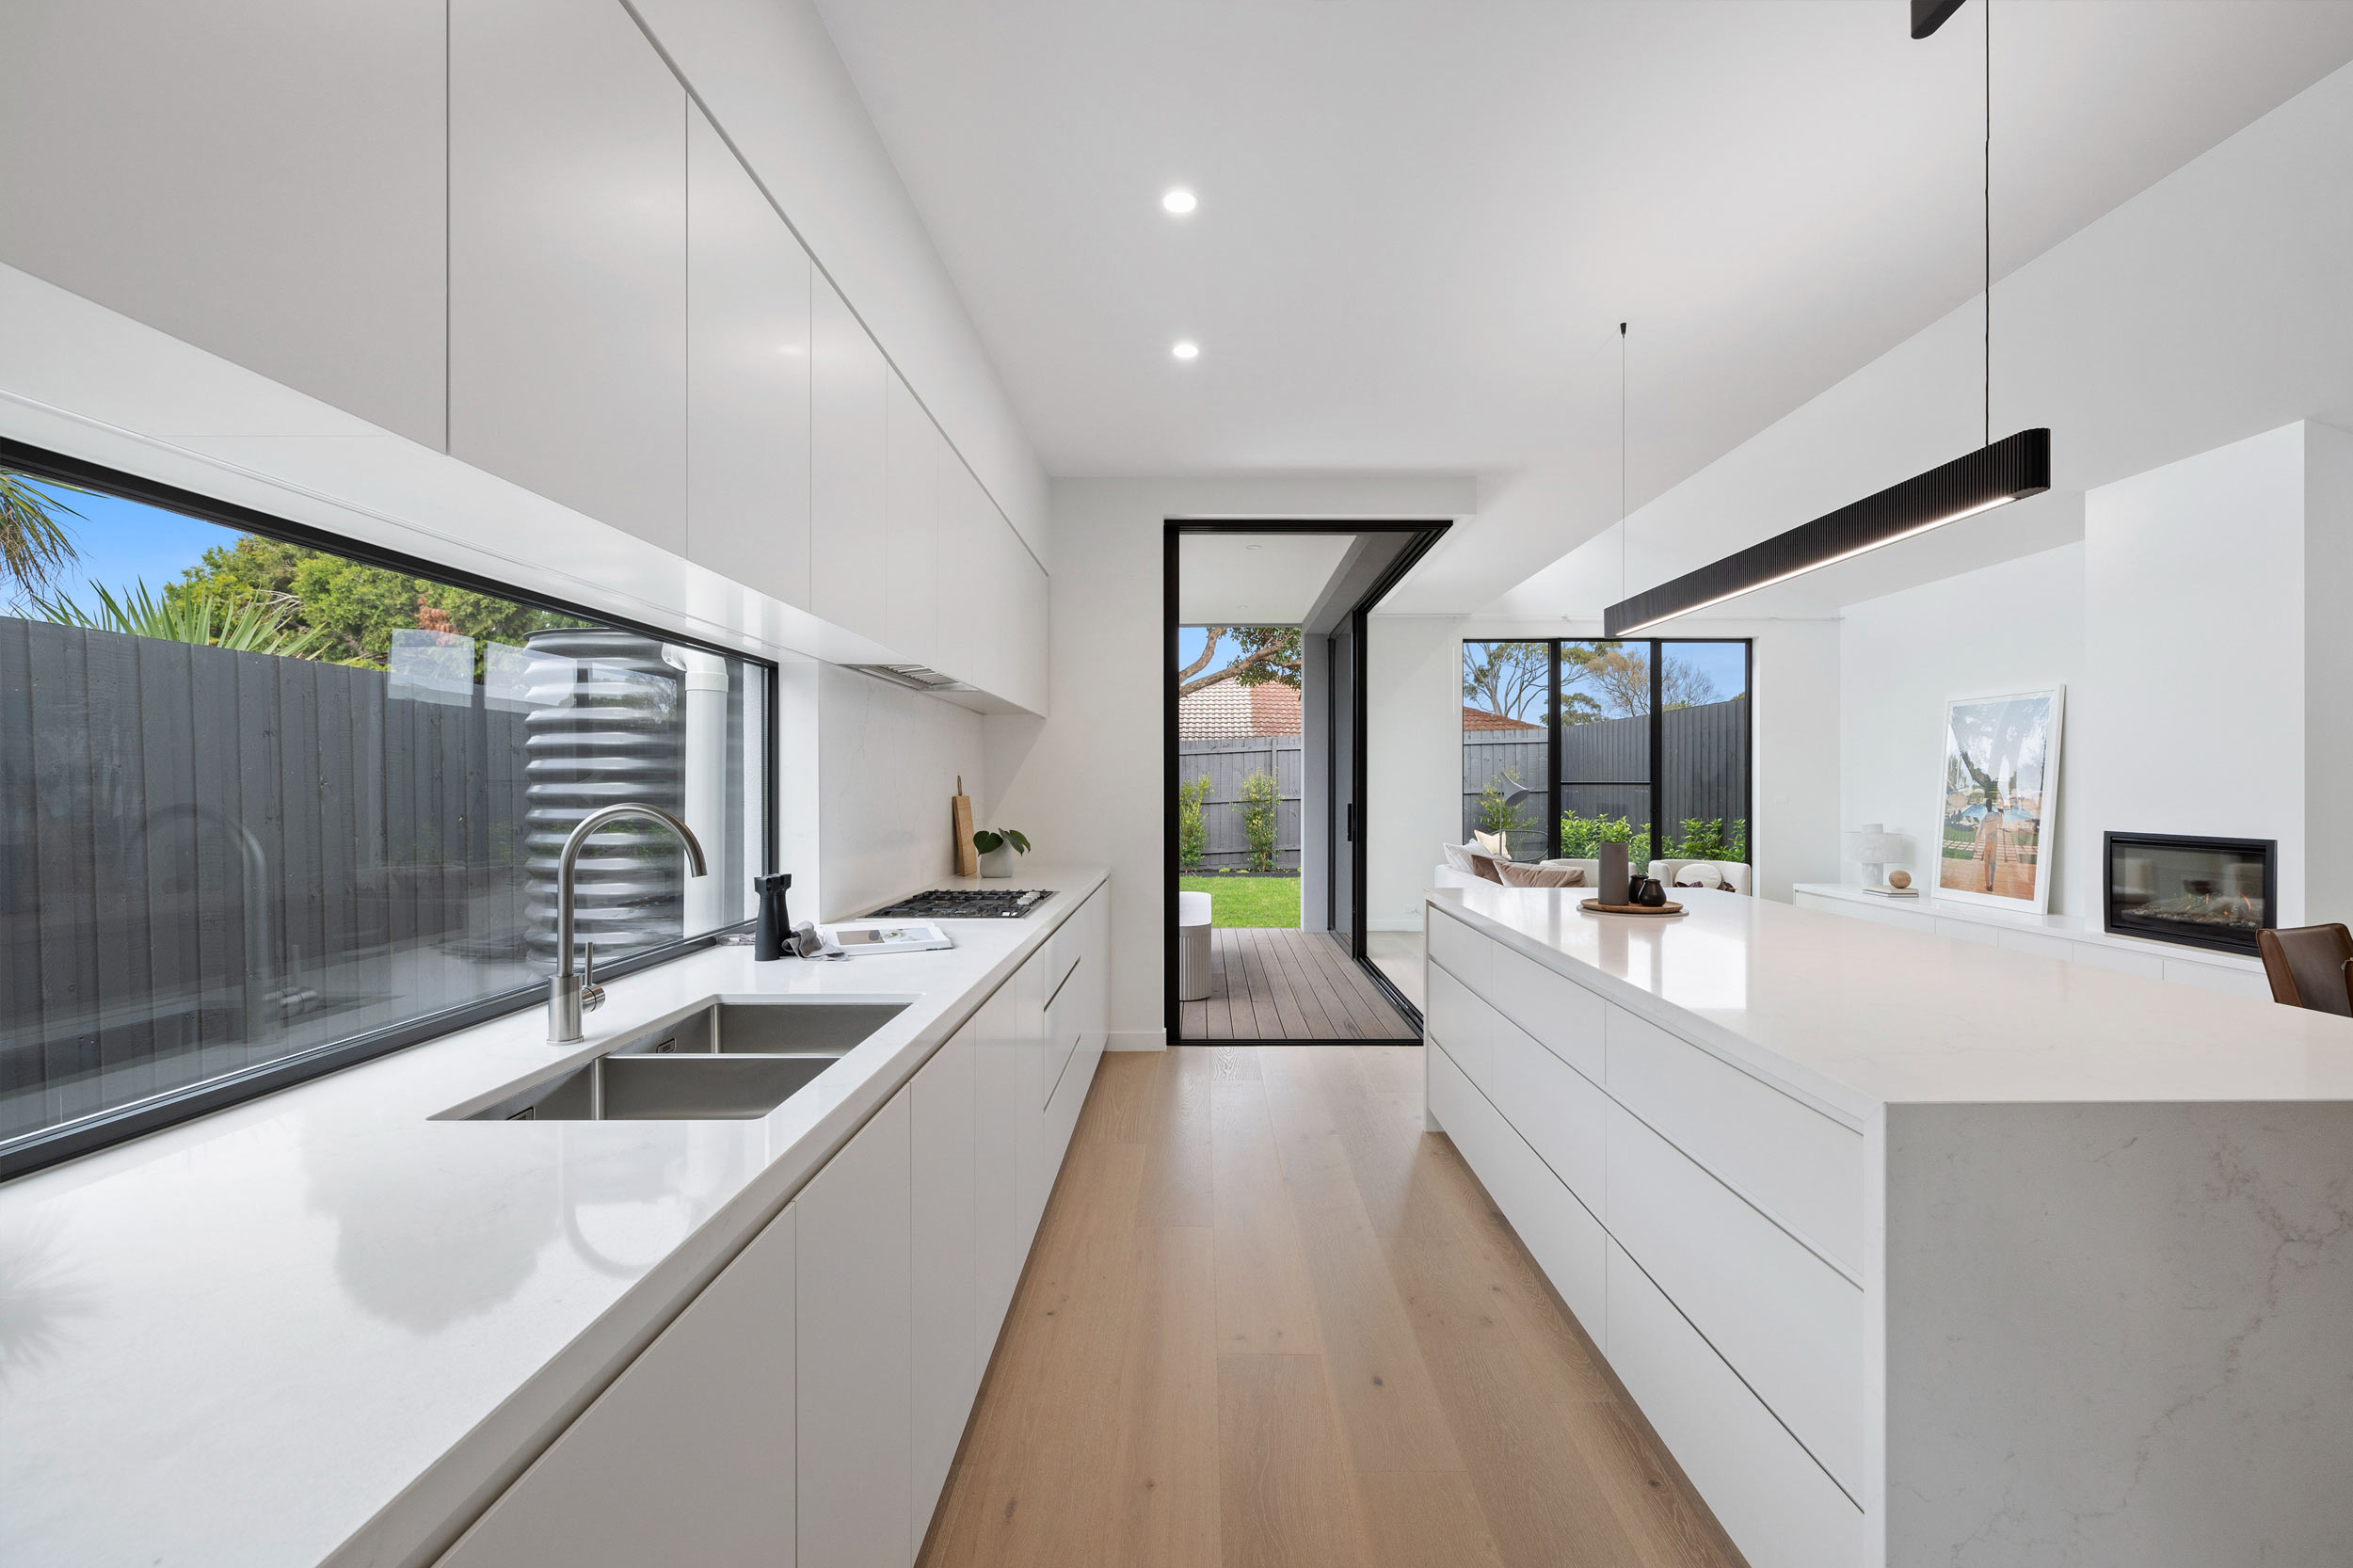 Mordialloc – New Build Dual Occupancy